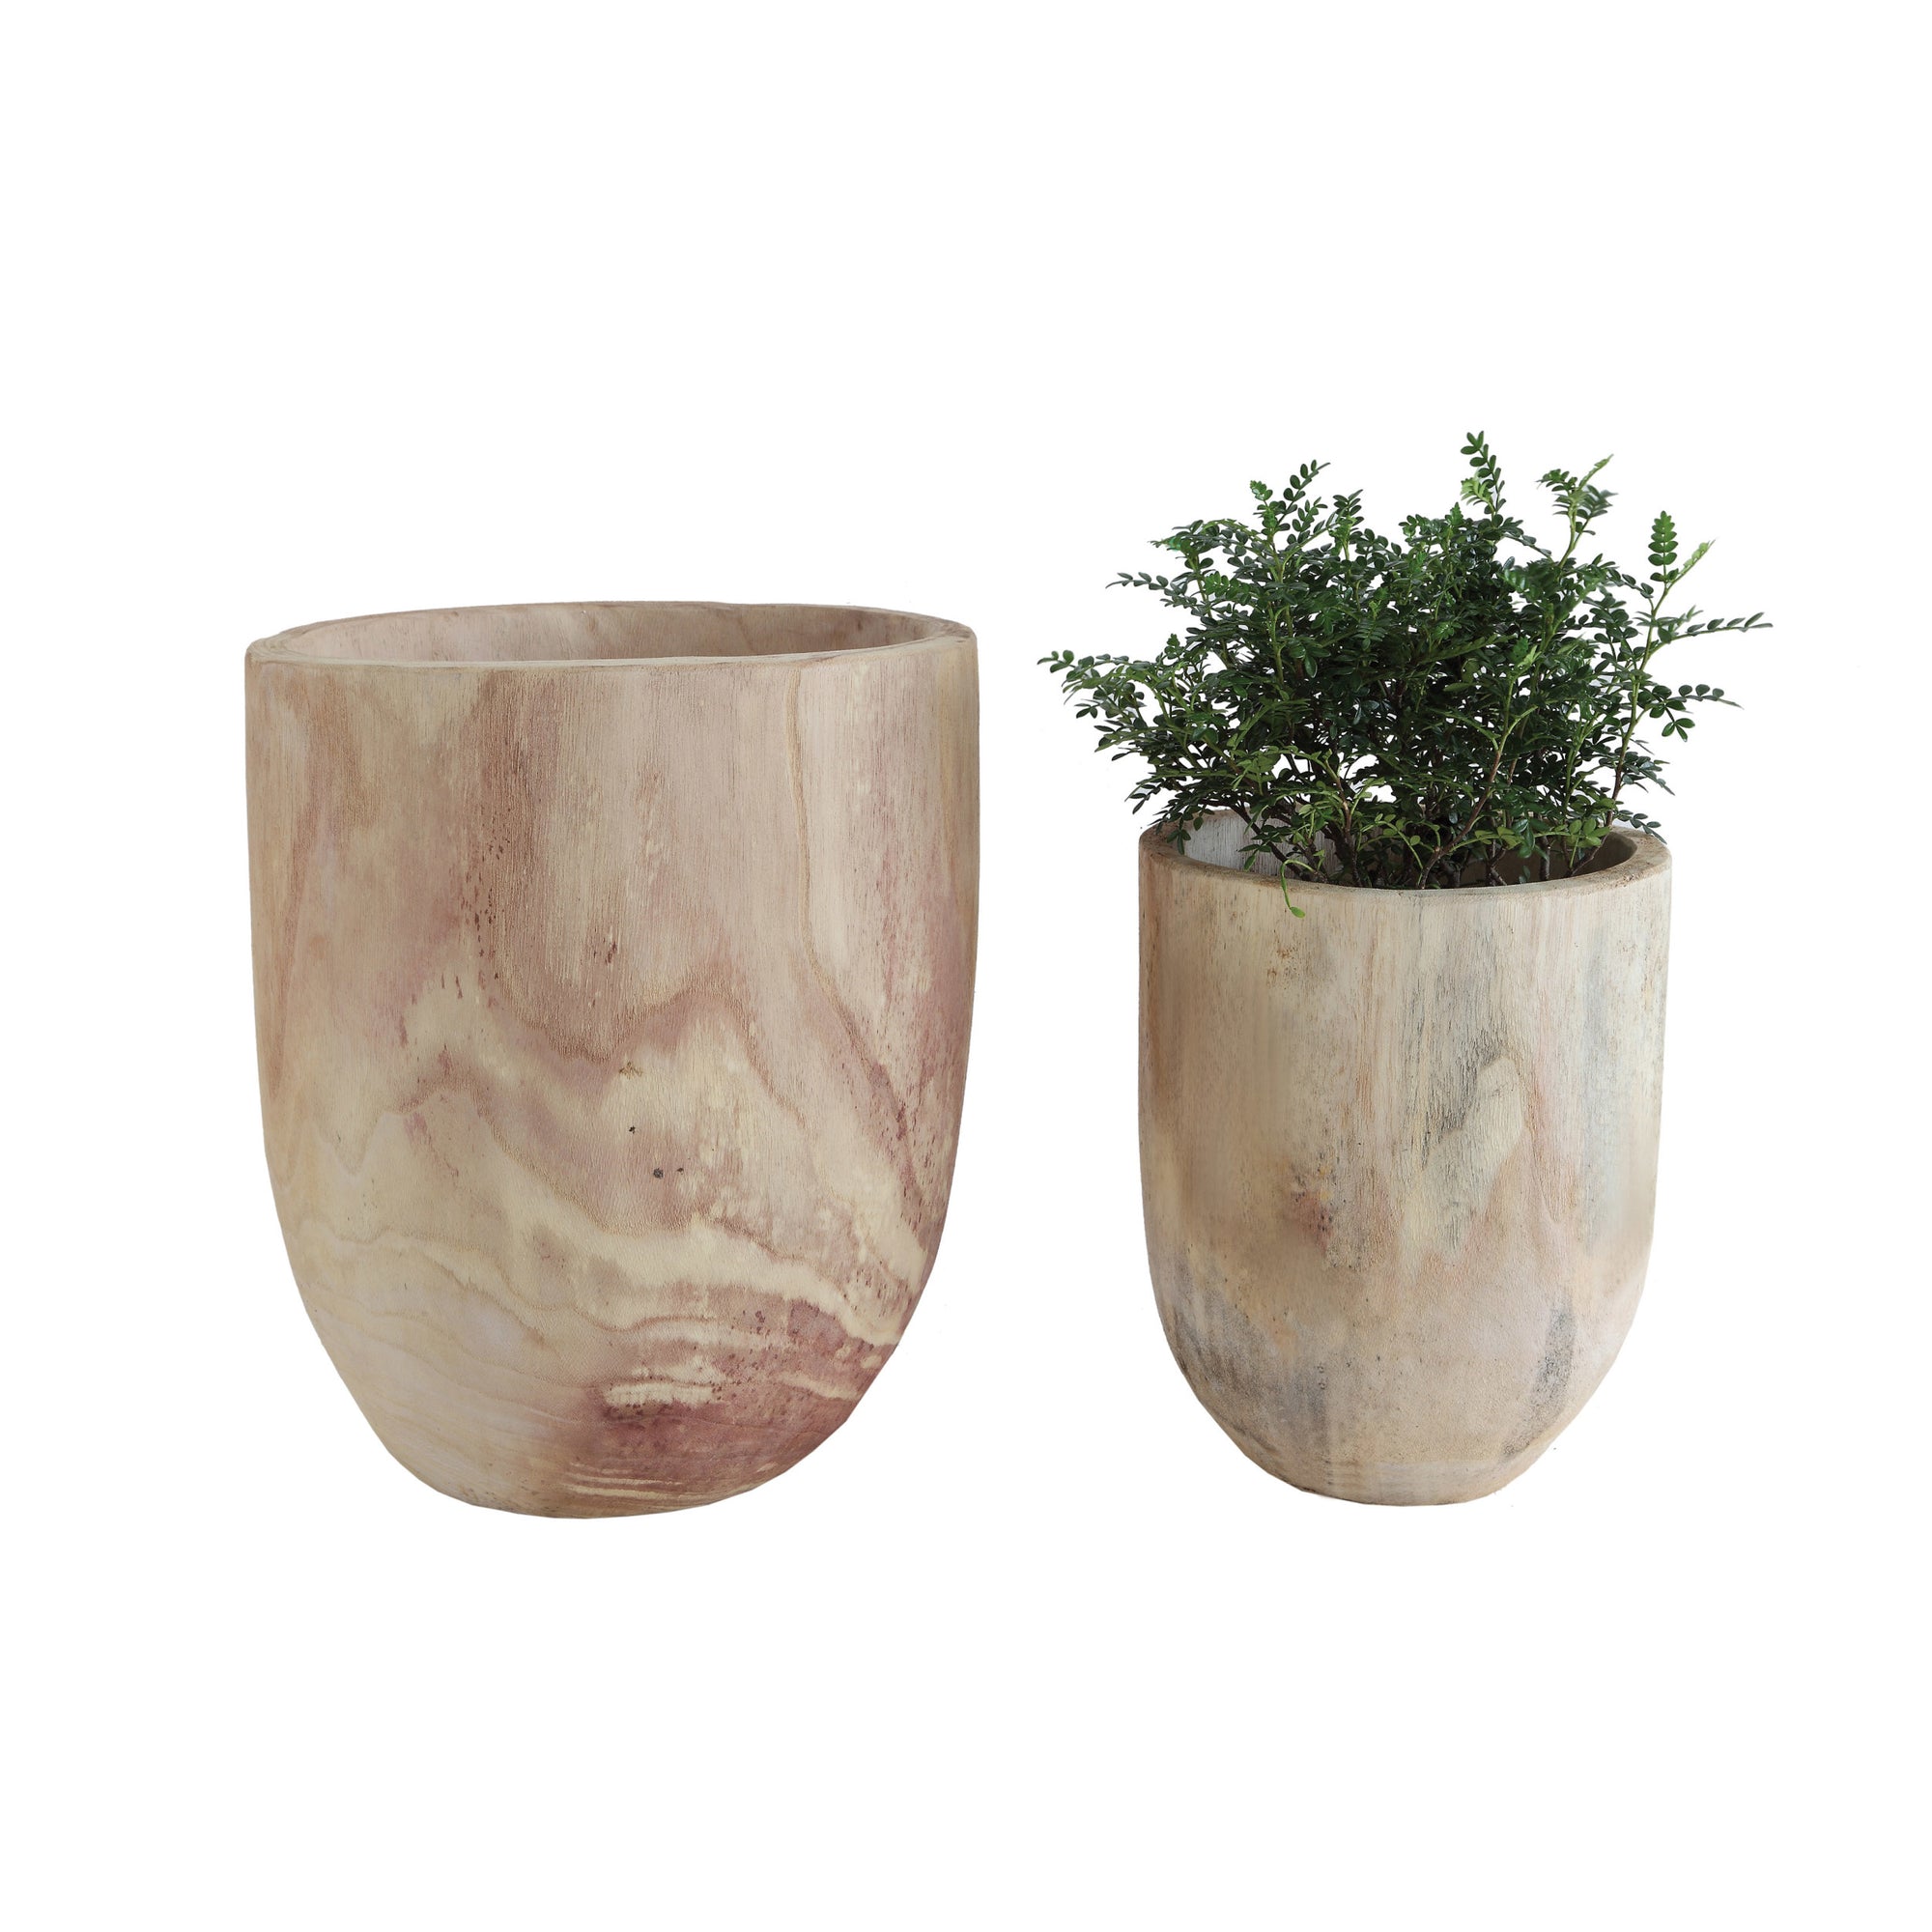 Solid Paulownia Wood Planters. Medium and large size options available. Neutral in color and slight variation in texture and shape. Perfect for storing faux stems or gorgeous greenery. Home Decor. Rustic home decor. 